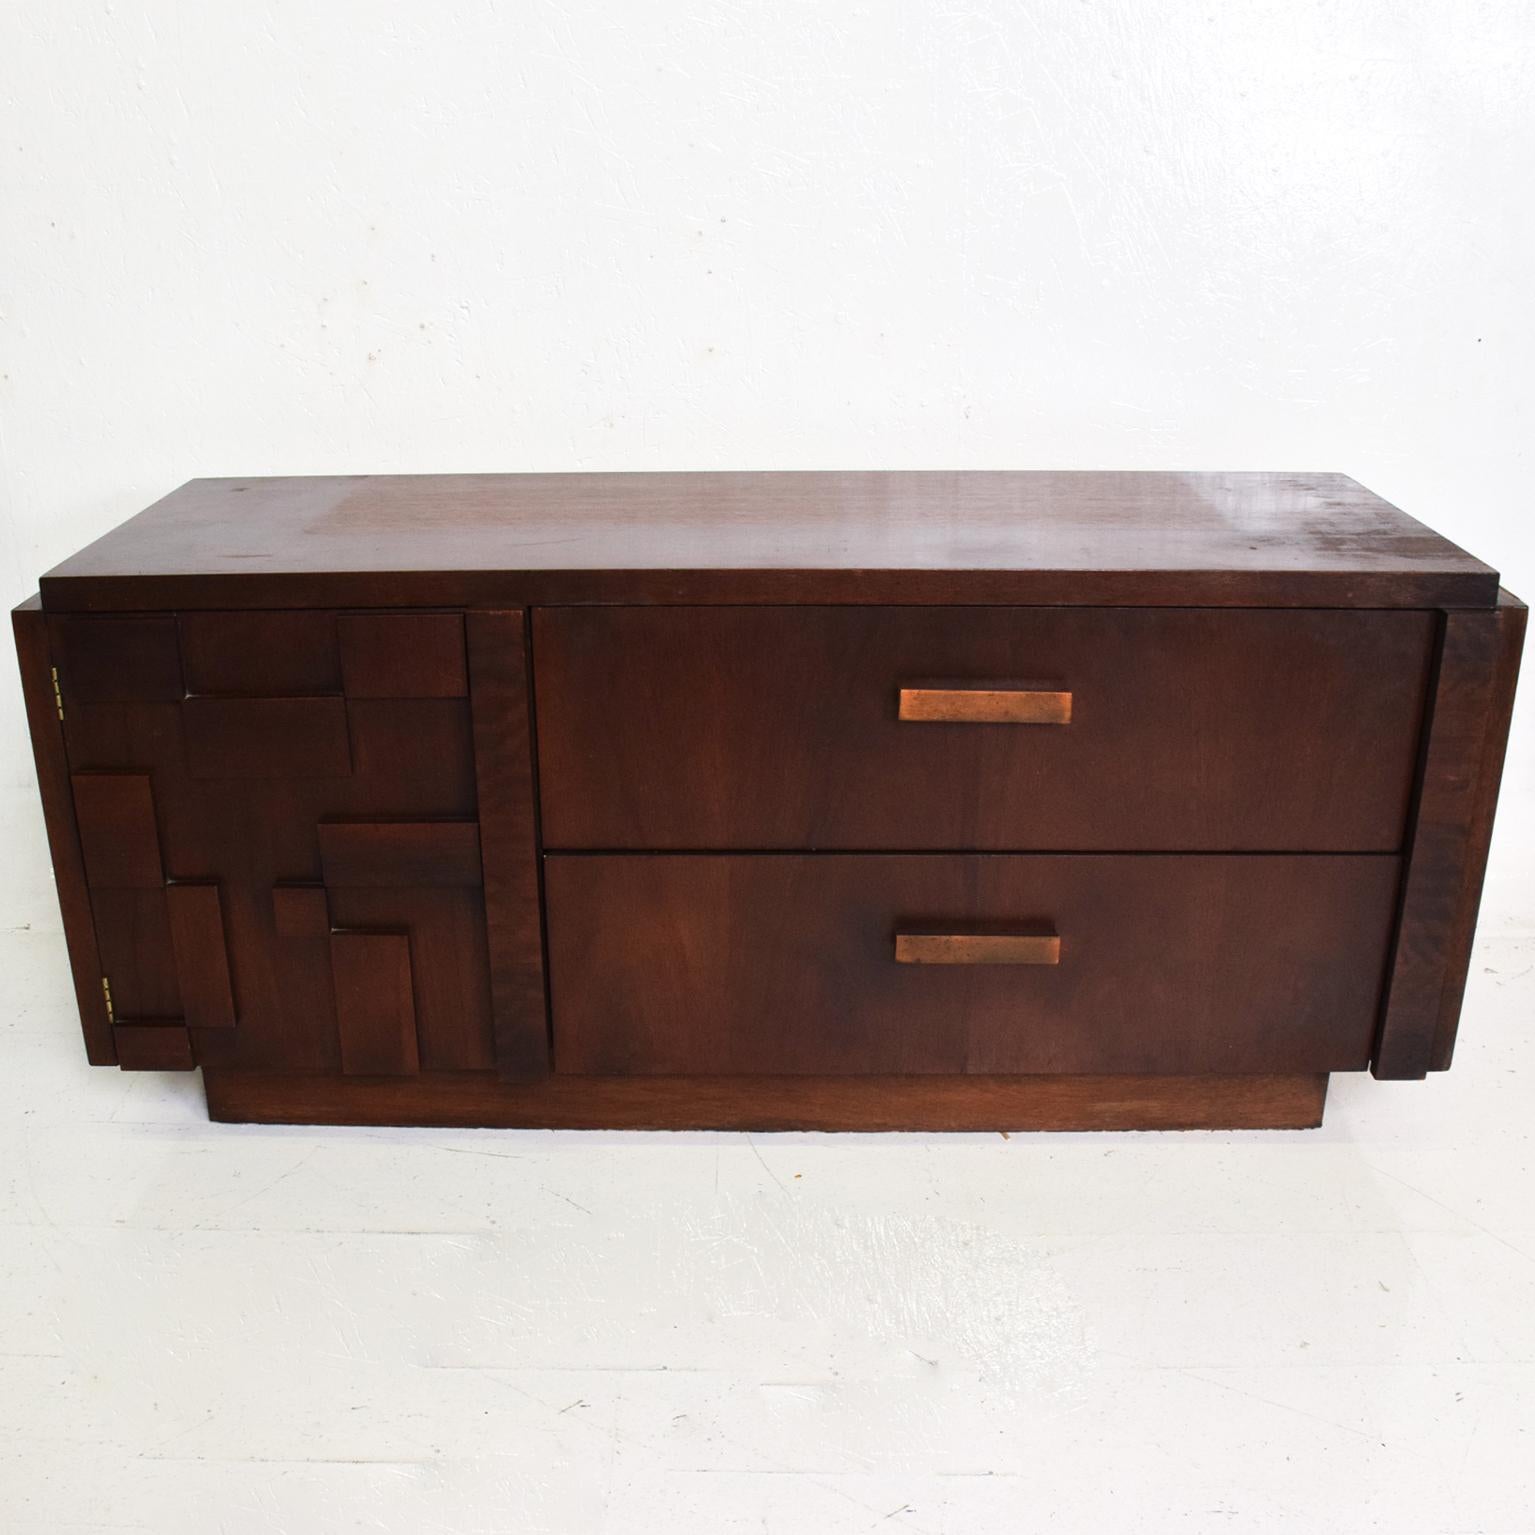 For your consideration, a lane brutalist short credenza Mid-Century Modern. Made in the USA, circa 1960s. Walnut wood. All drawers are open and close with Ease. Dimensions: 54